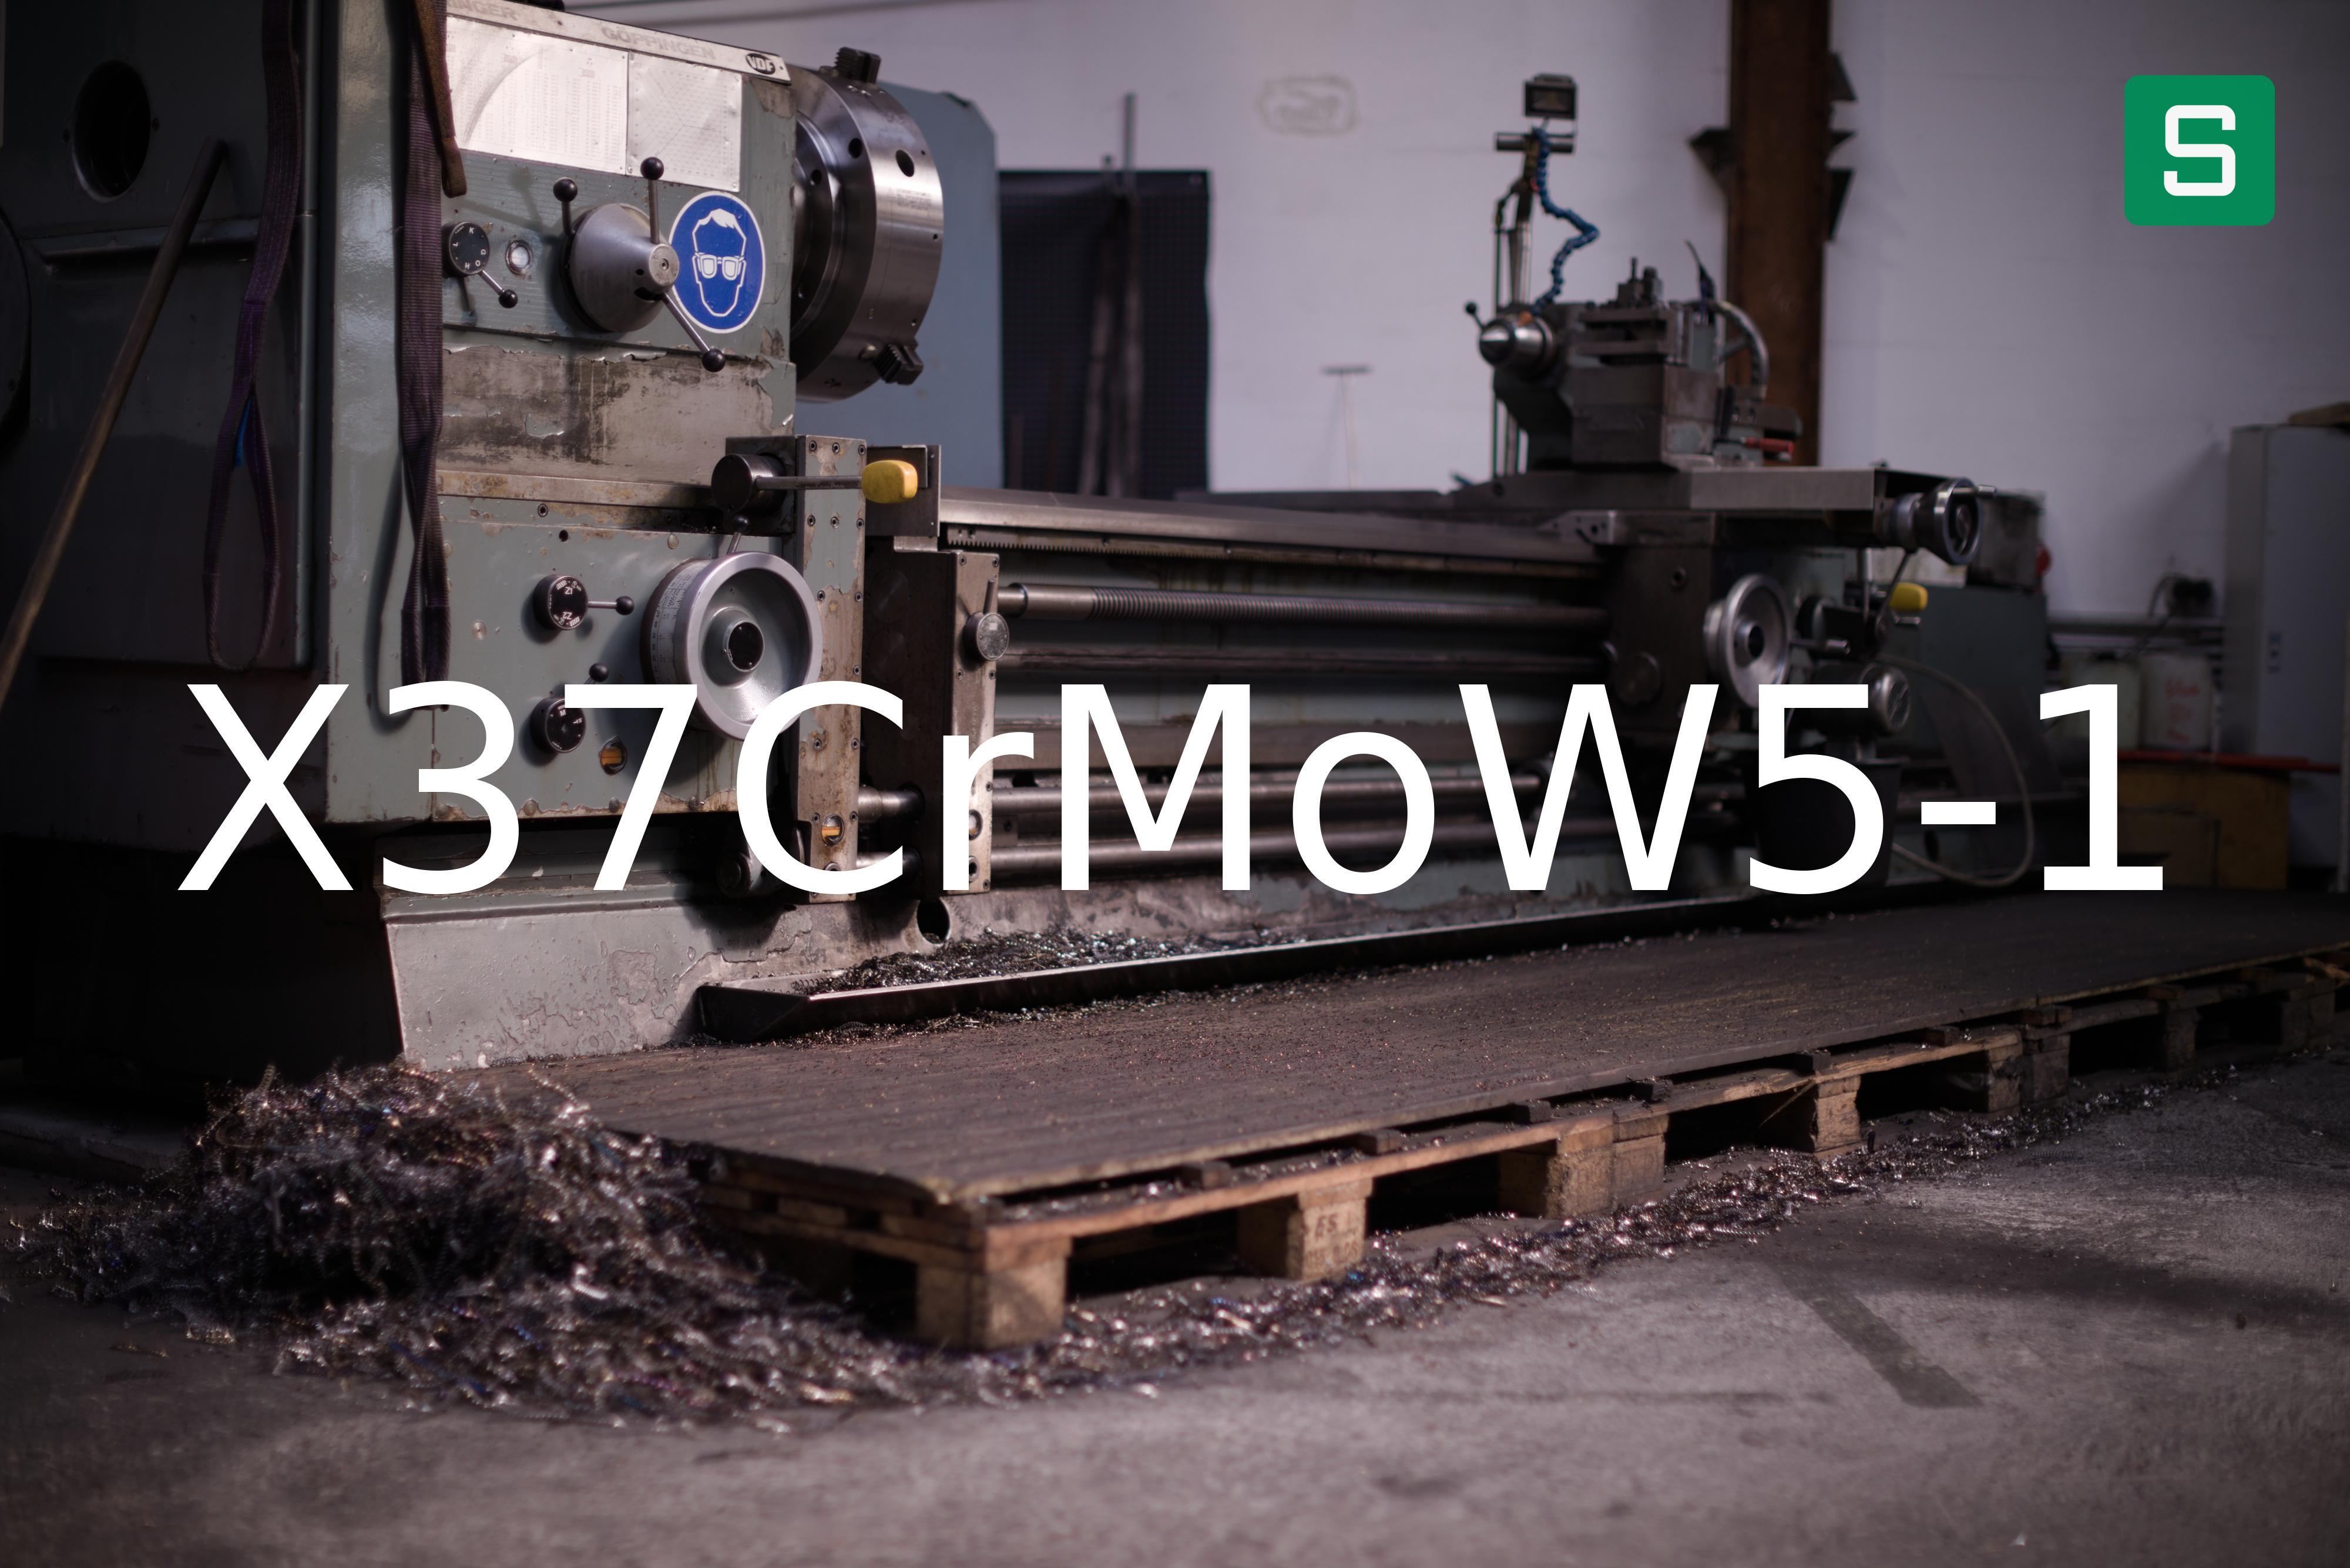 Steel Material: X37CrMoW5-1